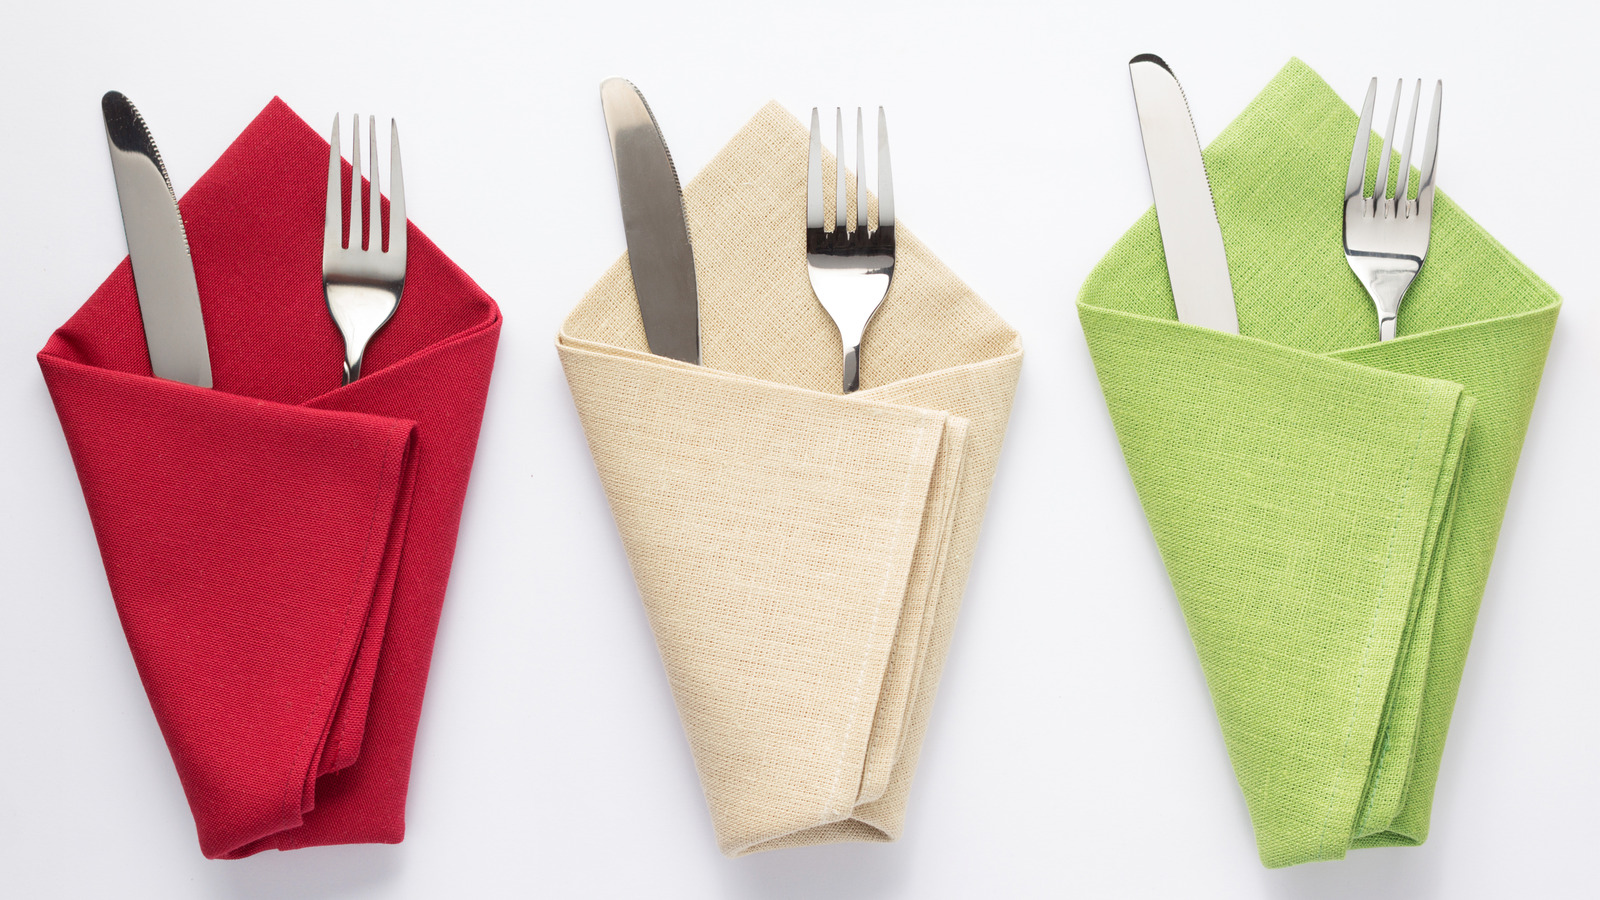 https://www.foodrepublic.com/img/gallery/how-to-fold-a-fancy-dinner-napkin-like-some-kind-of-expert/l-intro-1693565334.jpg